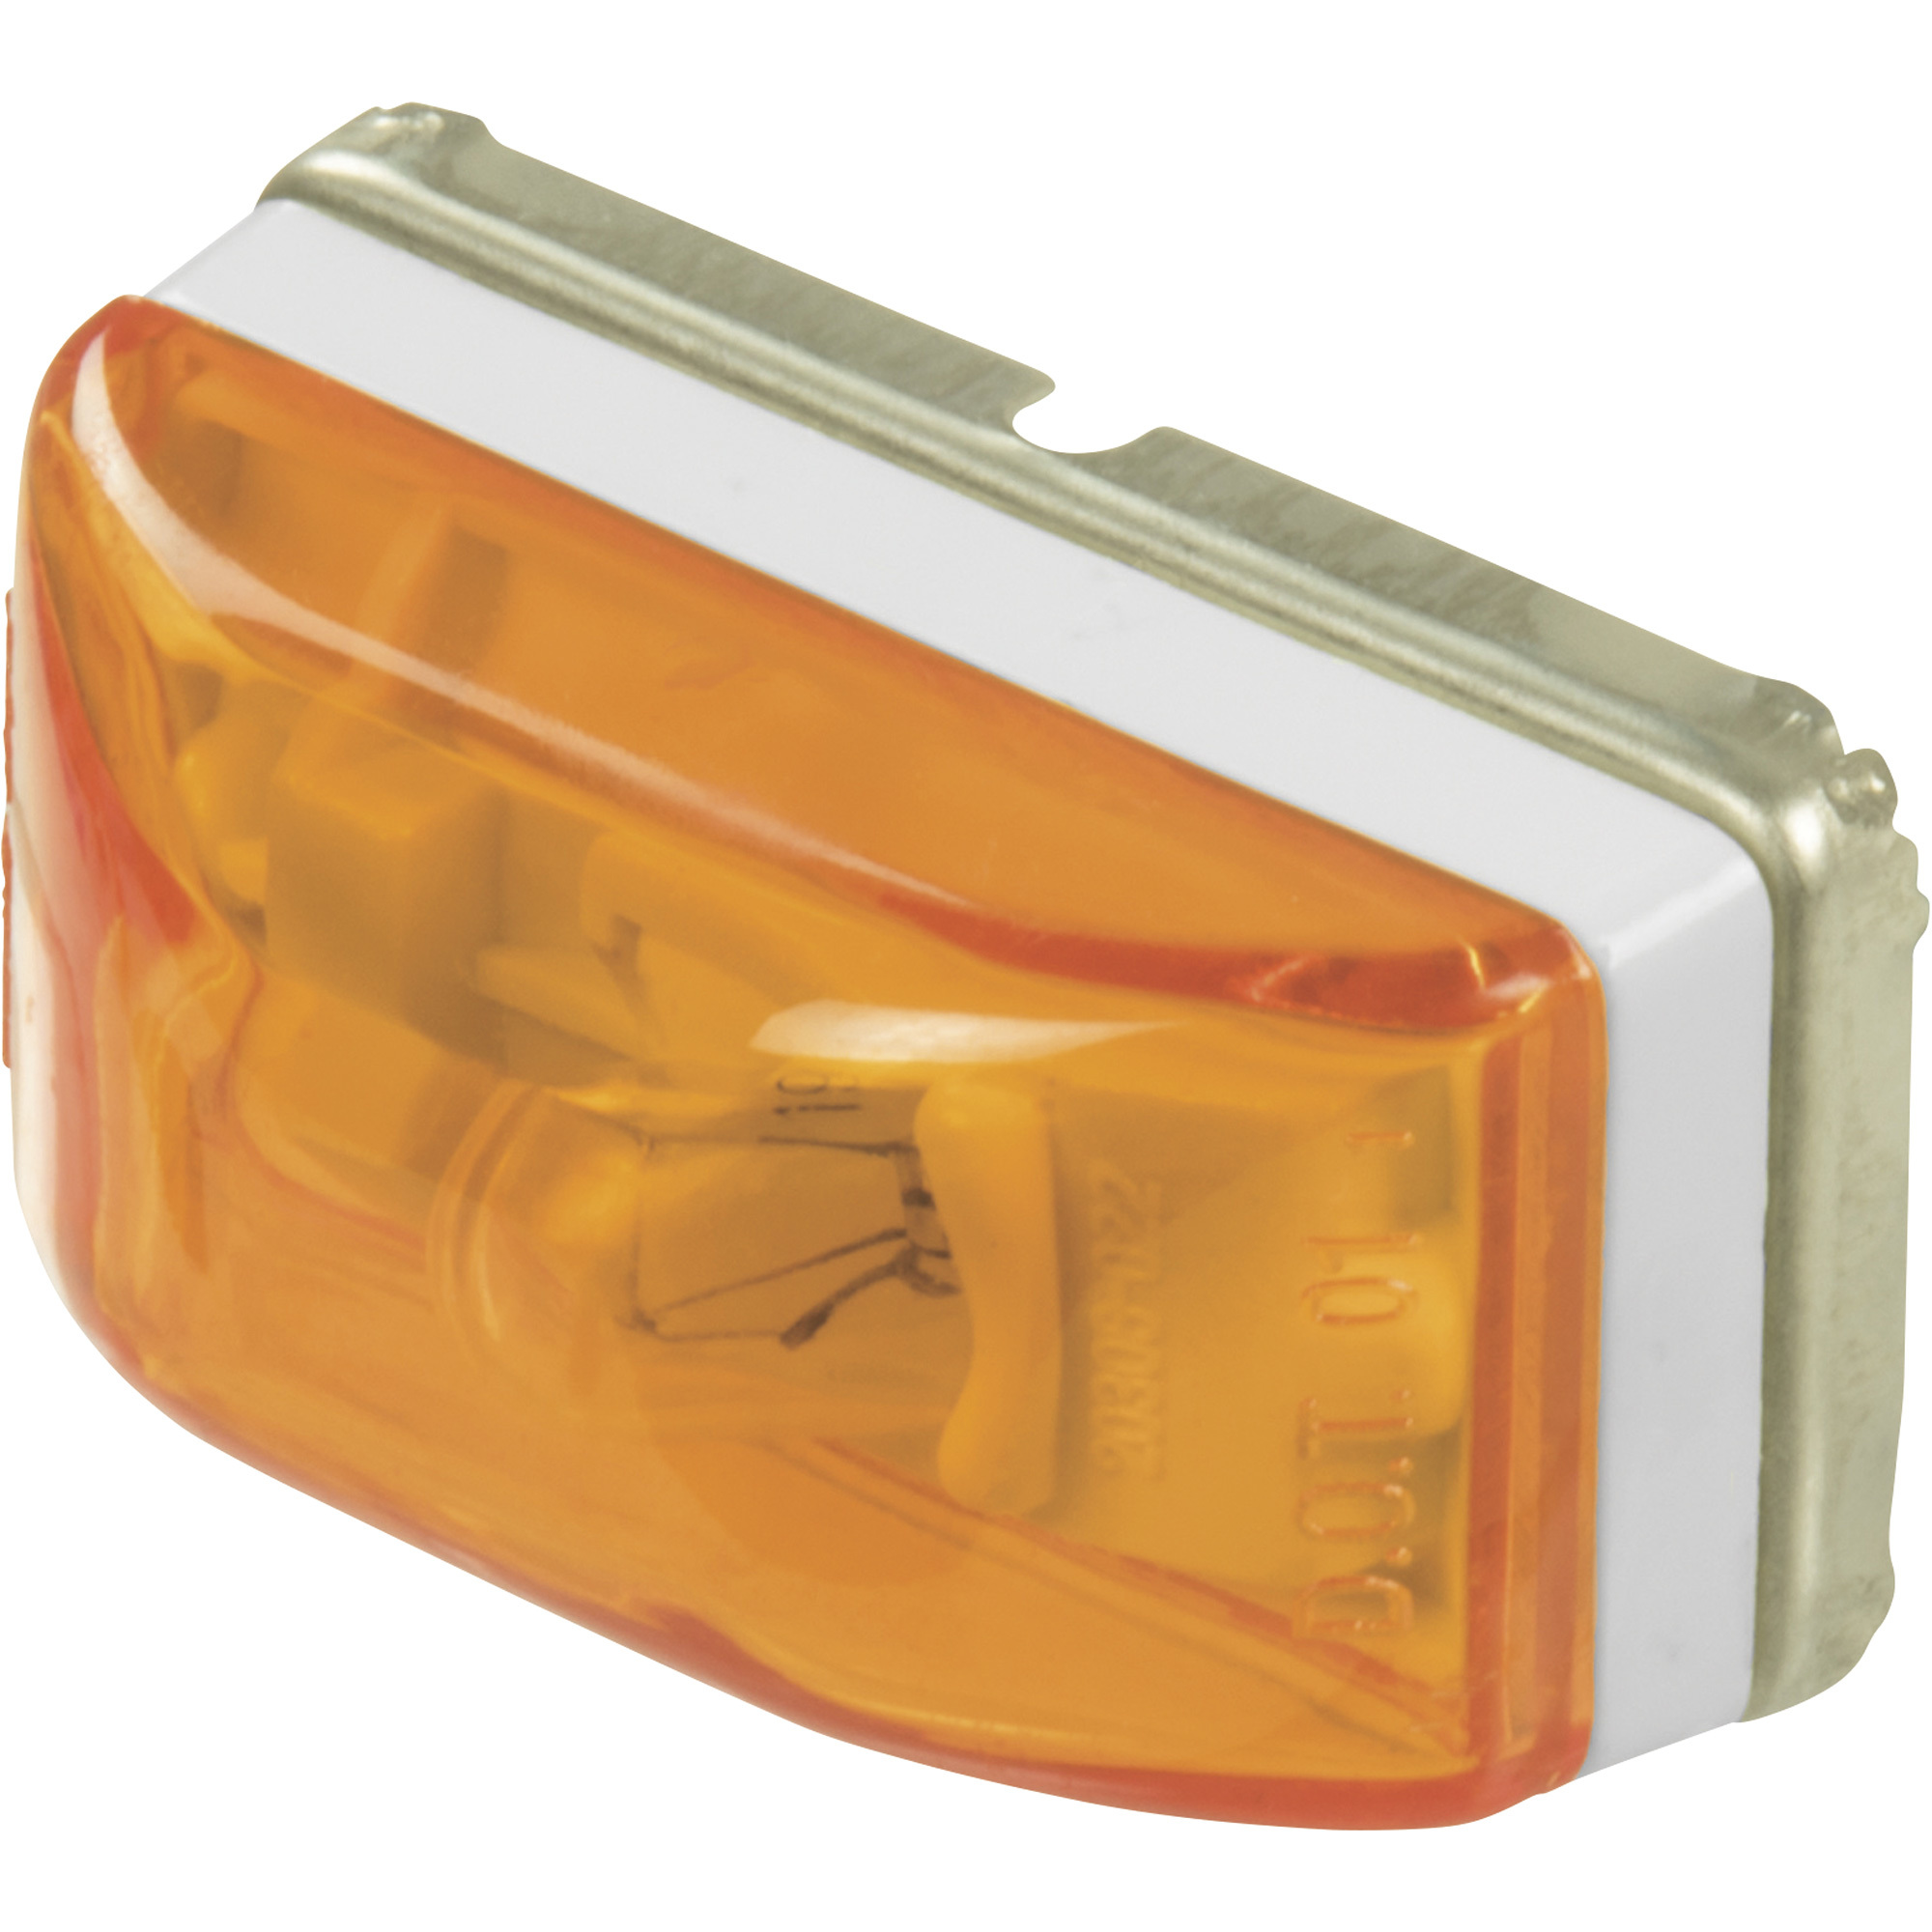 Hopkins Towing Solutions Incandescent Rectangular Clearance and Side Marker Trailer Light â 2 1/16Inch, Amber, Model 490BA